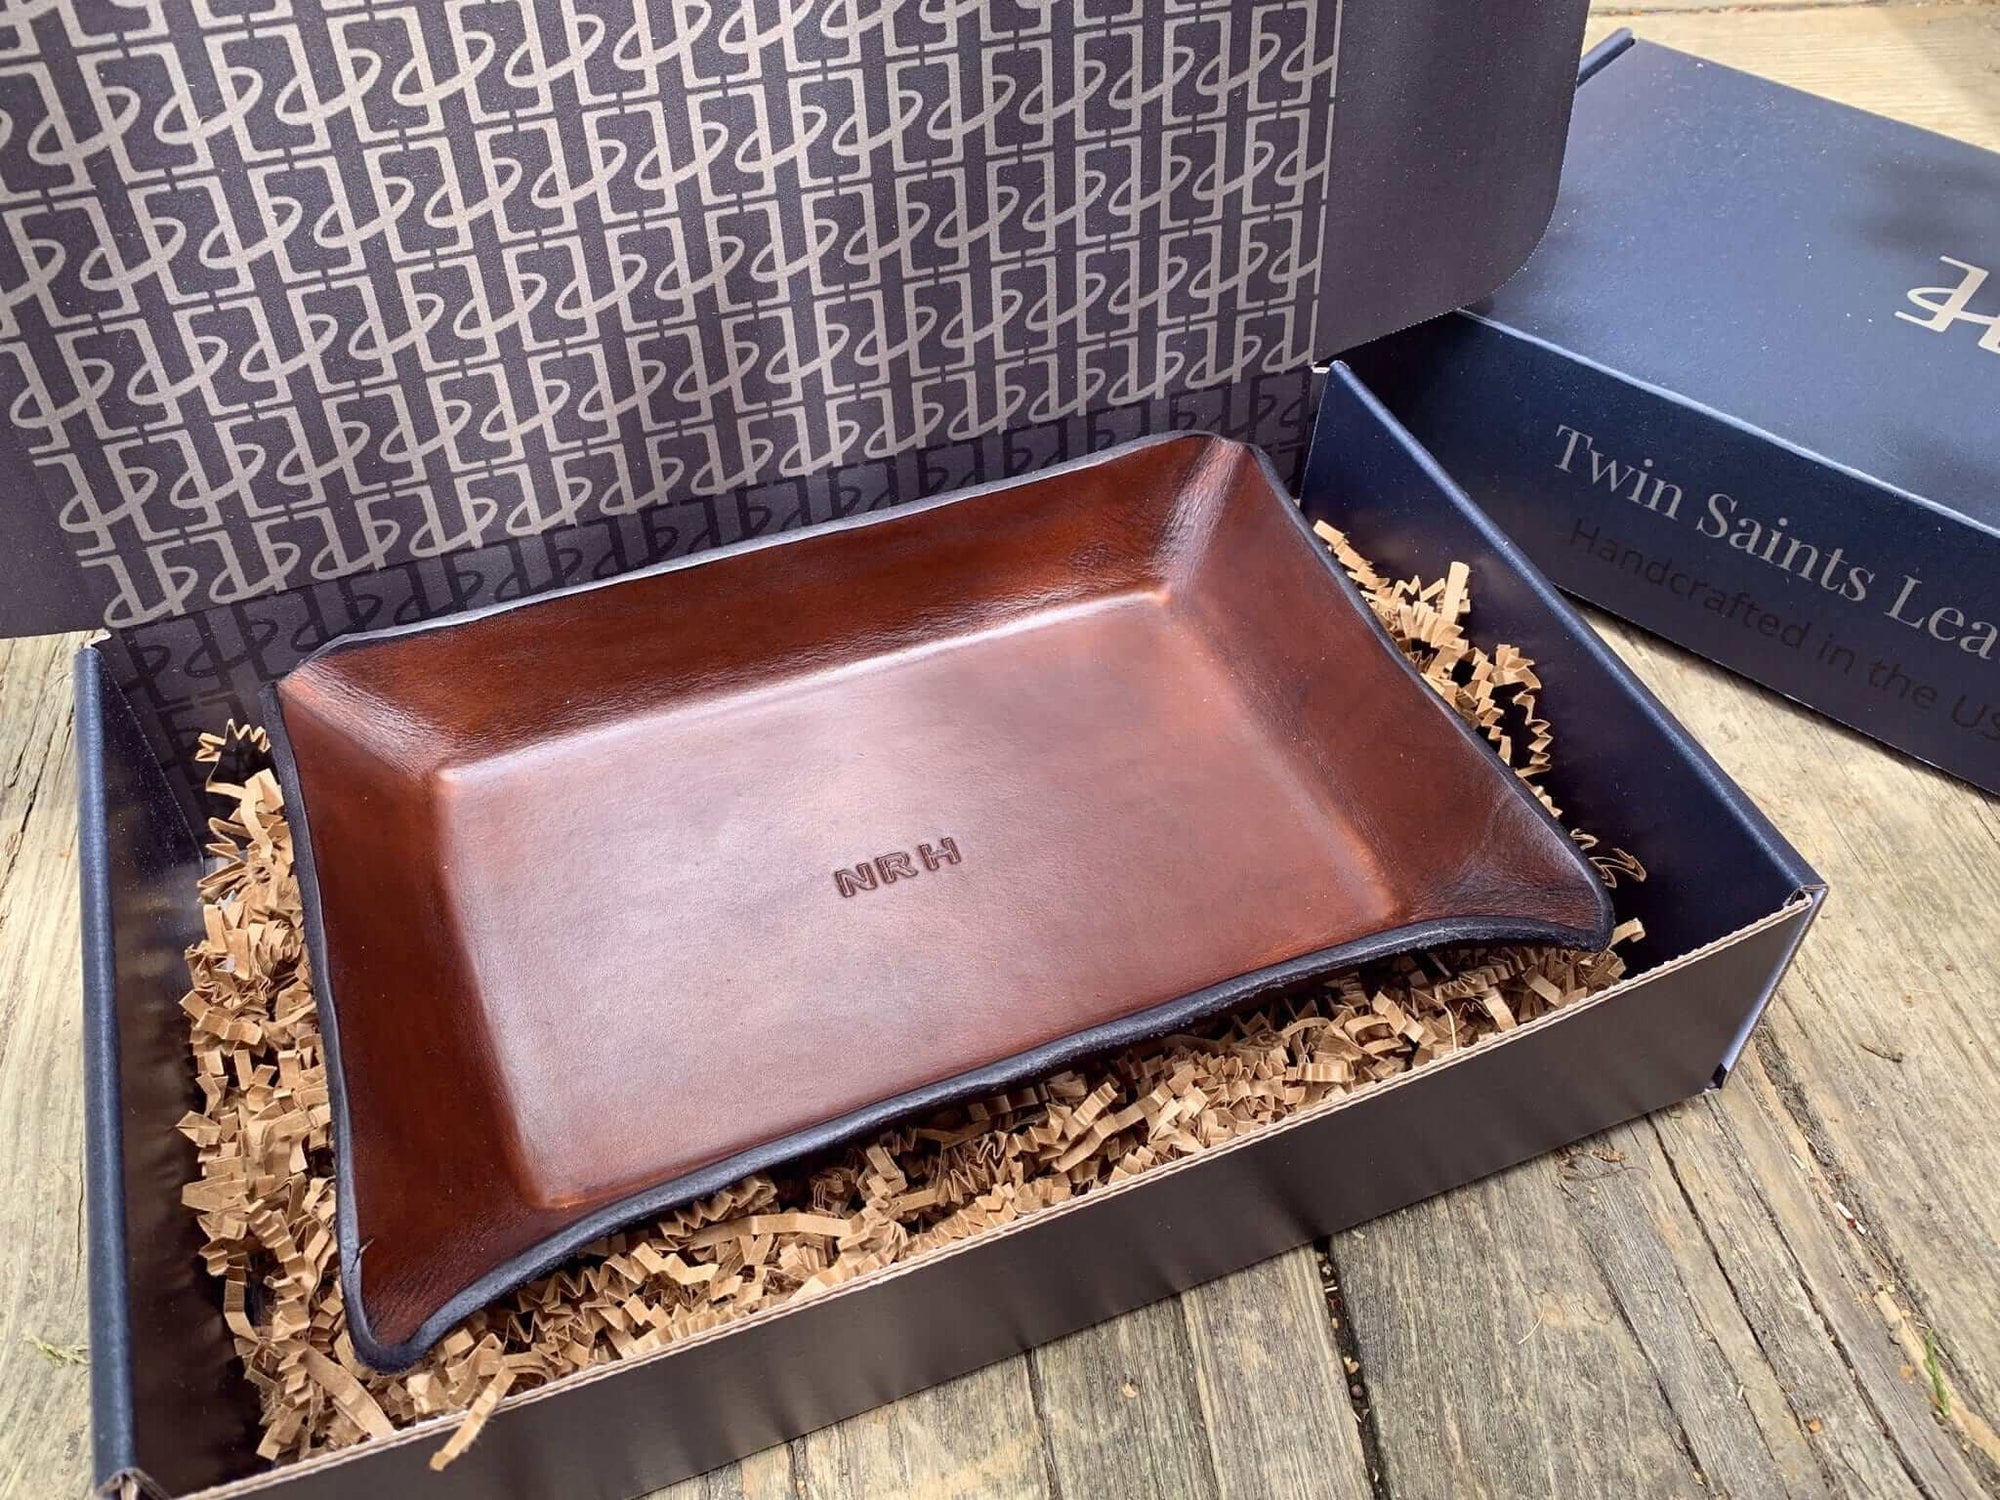 Twin Saints Leather Groomsmen Gift. Valet with Monogram and Gift Box.